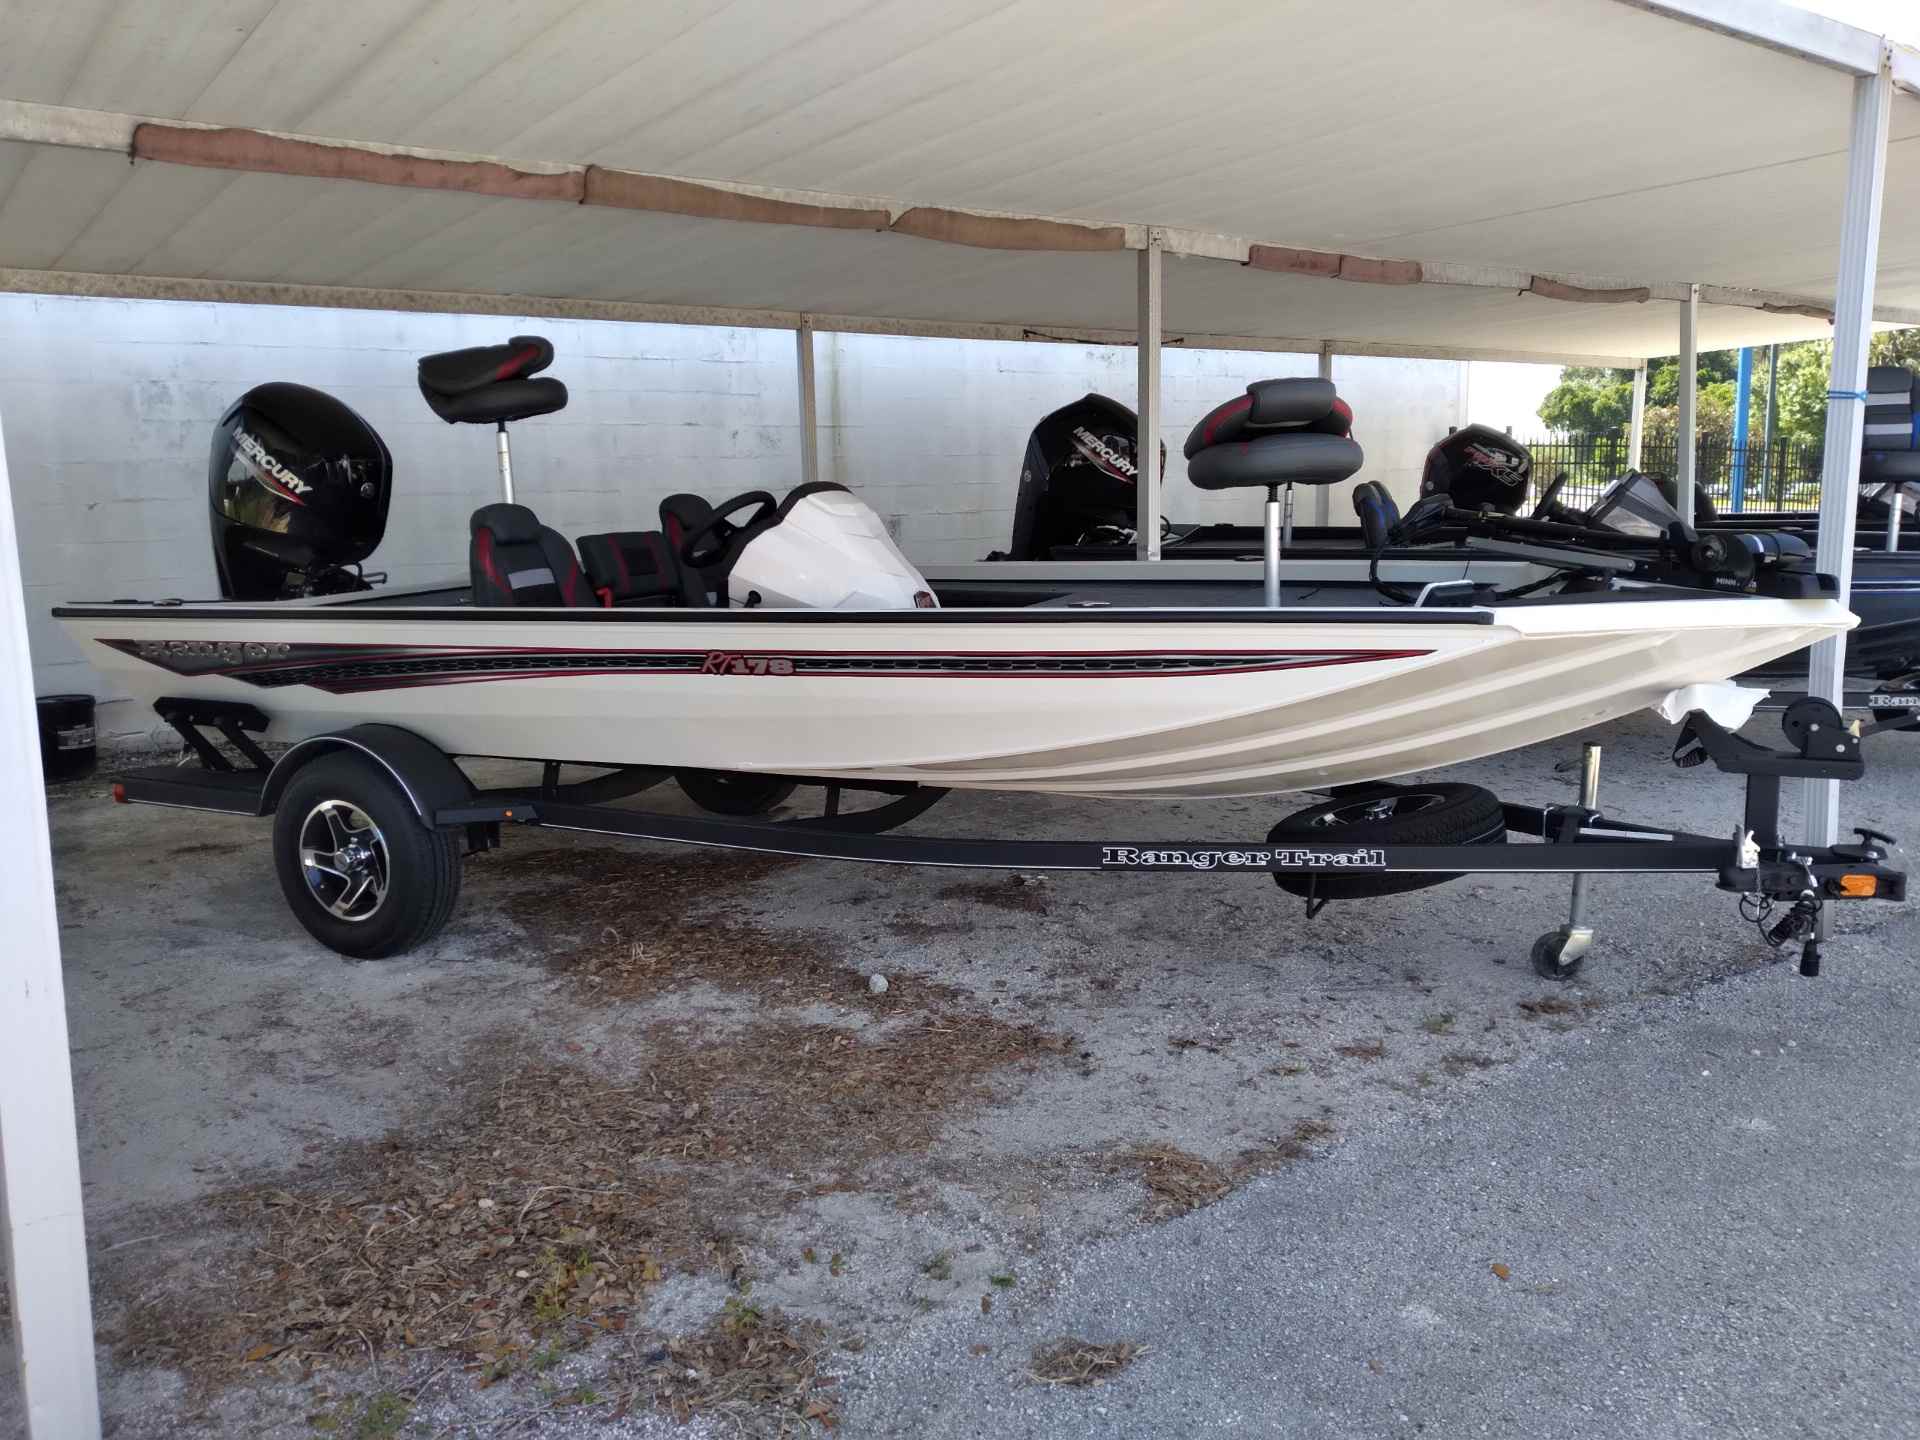 Tracker Boats - Bass Boats, Canoes, Kayaks and more - Bass Fishing Forums